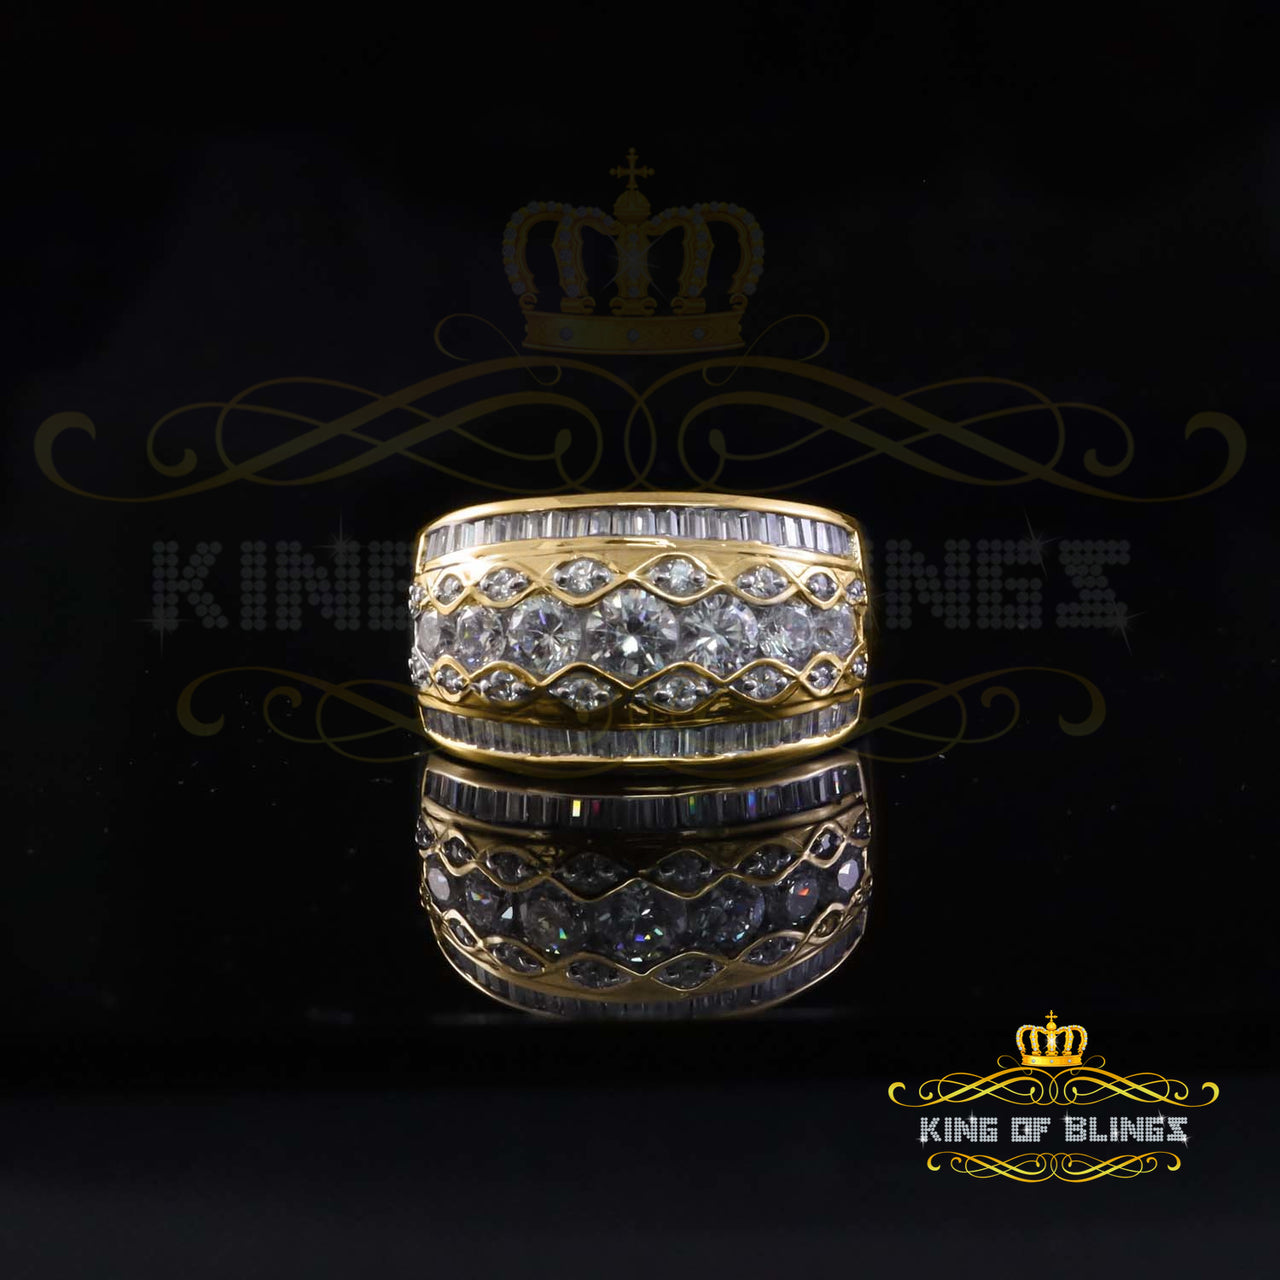 King Of Bling's Yellow Silver 3.50ct Cubic Zirconia Round Men's Adjustable Ring From SZ 9 to 11 KING OF BLINGS